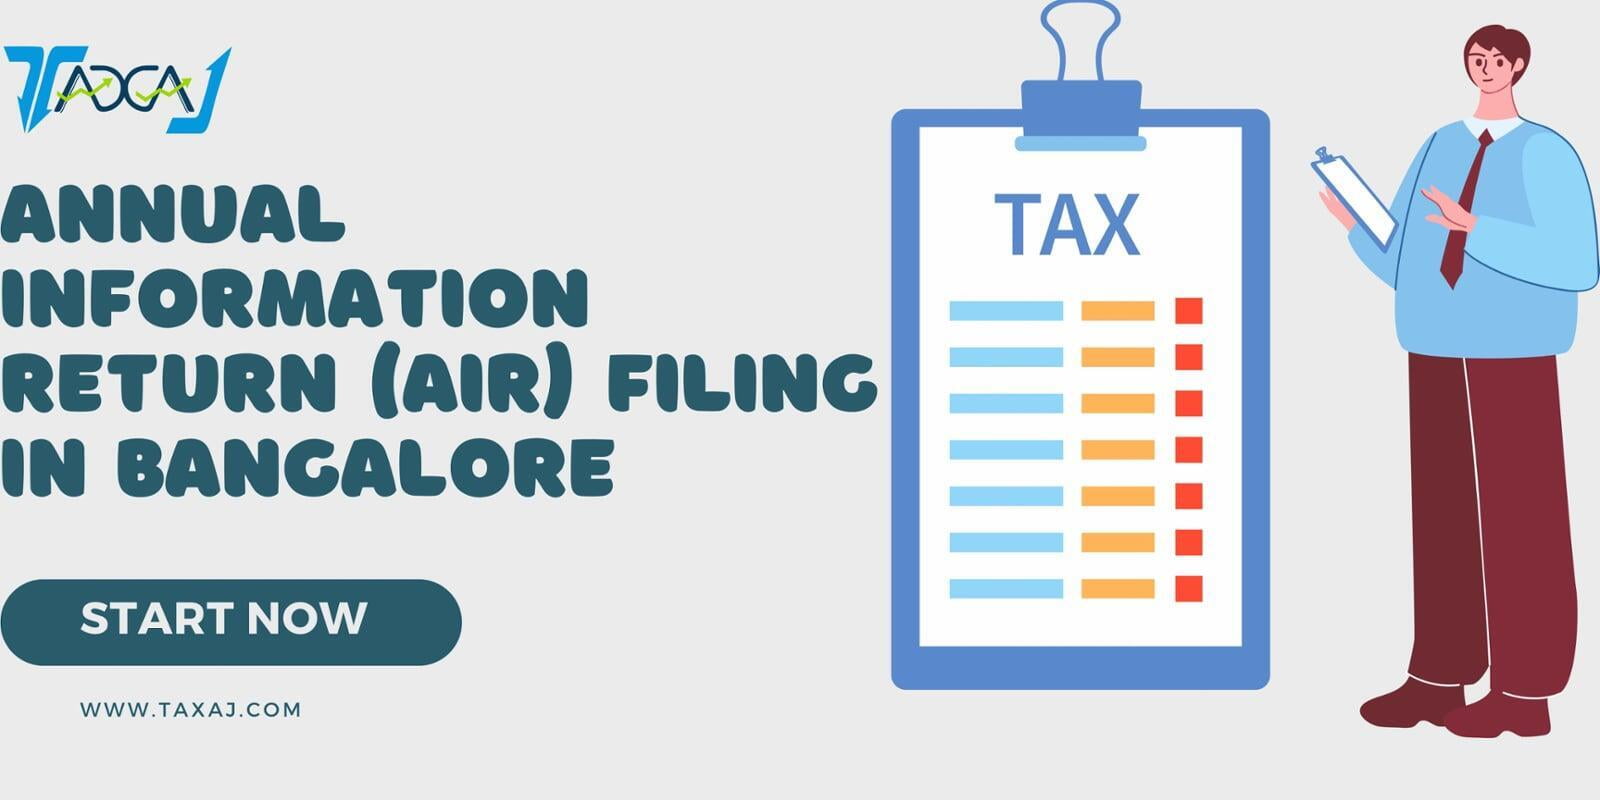 Annual Information Return (AIR) Filing in Bangalore with Our Expert Services